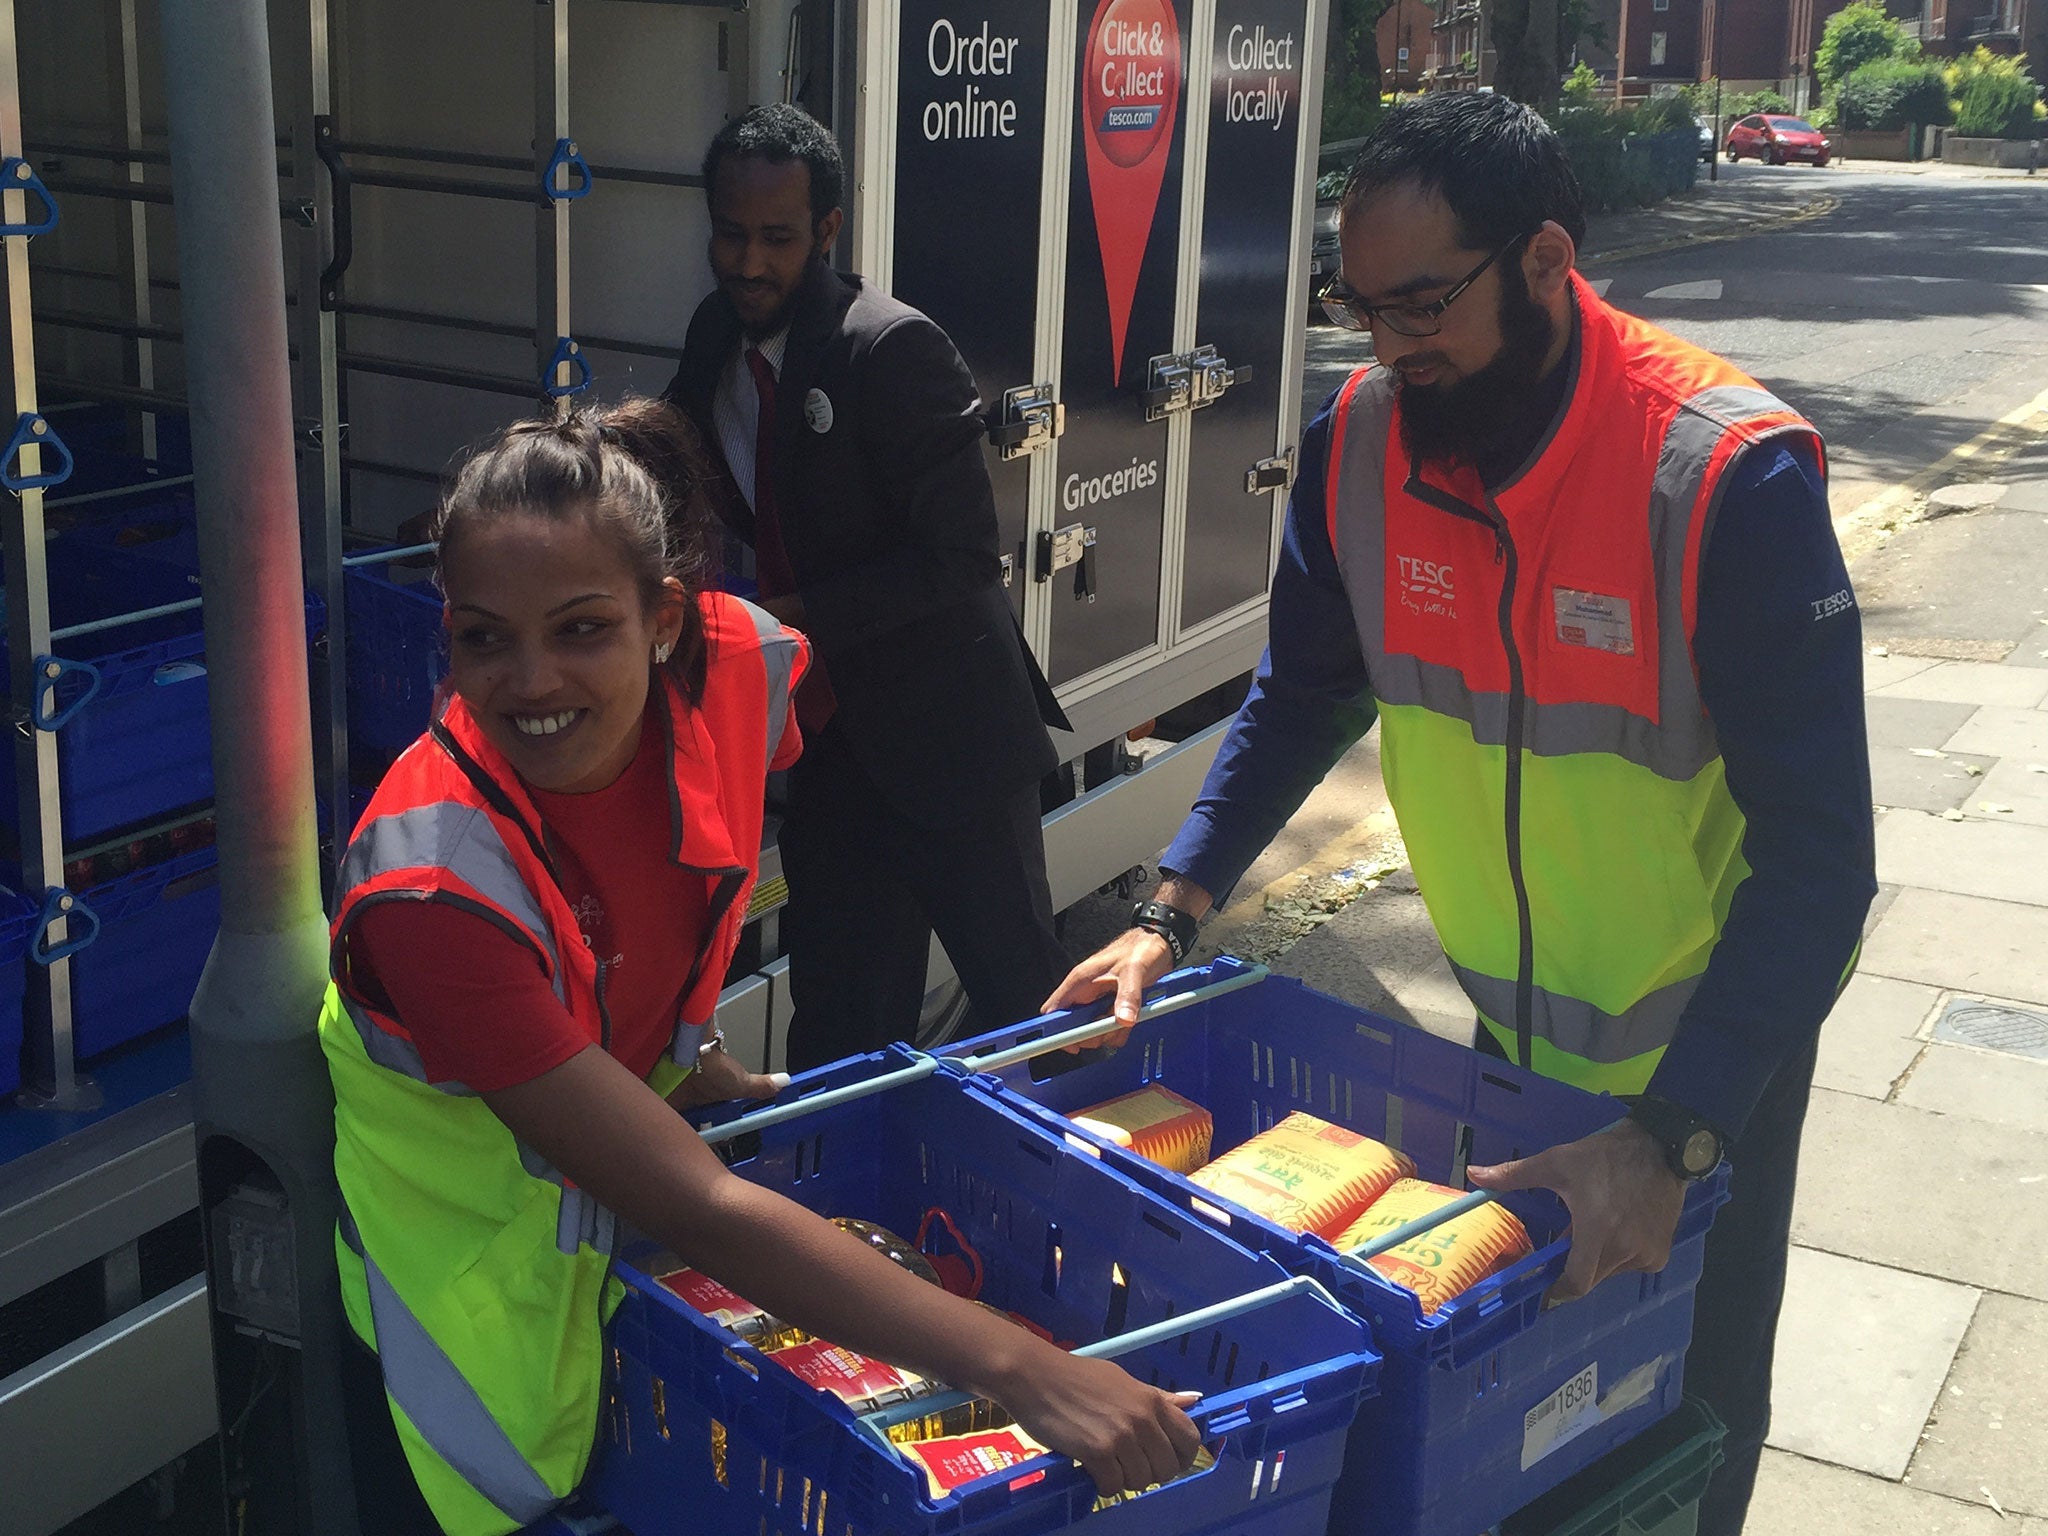 Tesco.com will deliver over £10,000 worth of food to 12 mosques across London to help feed those in need